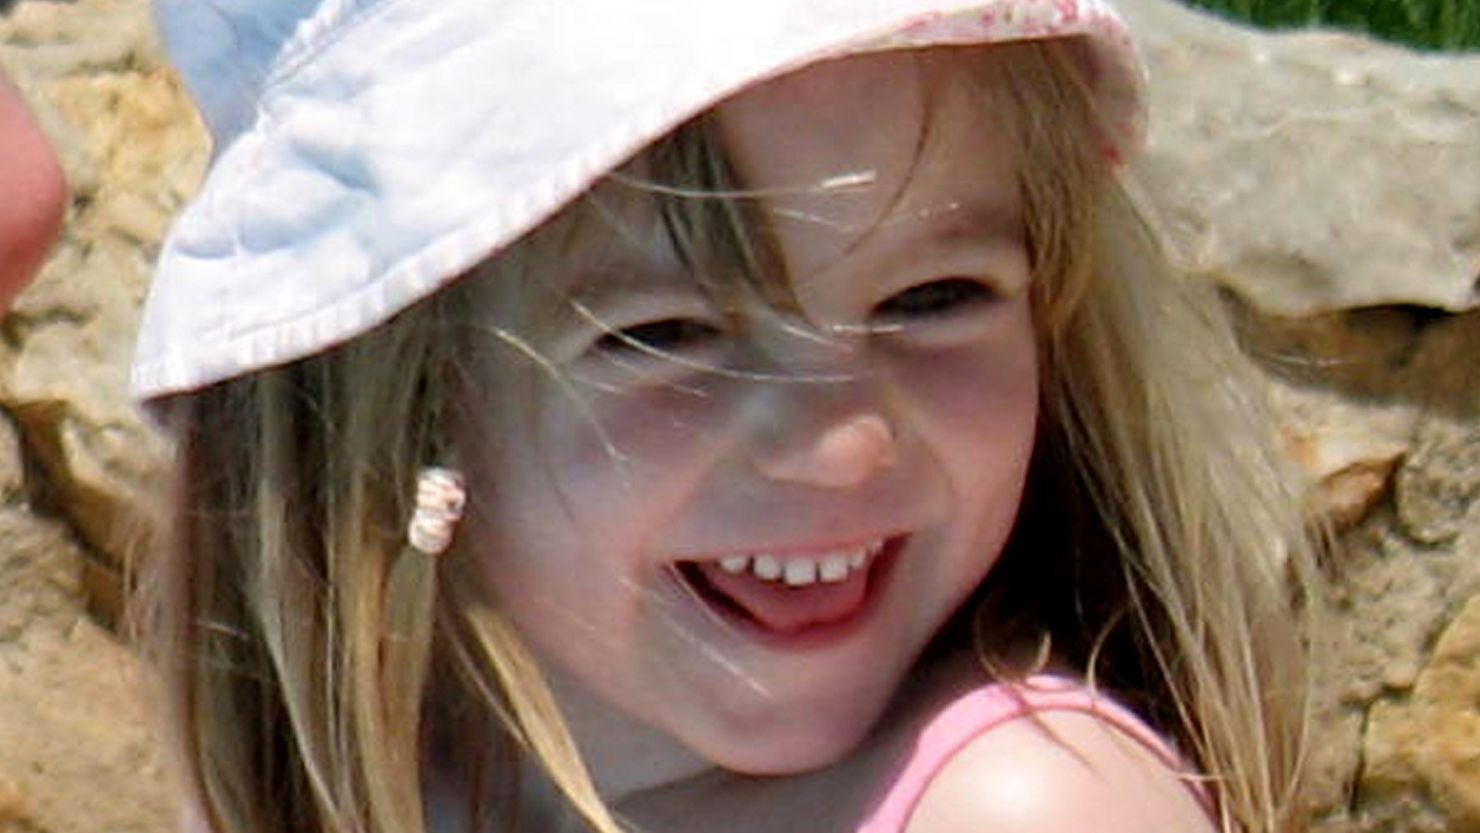 A picture released by the McCann family on May 24, 2007, shows missing British girl Madeleine McCann.